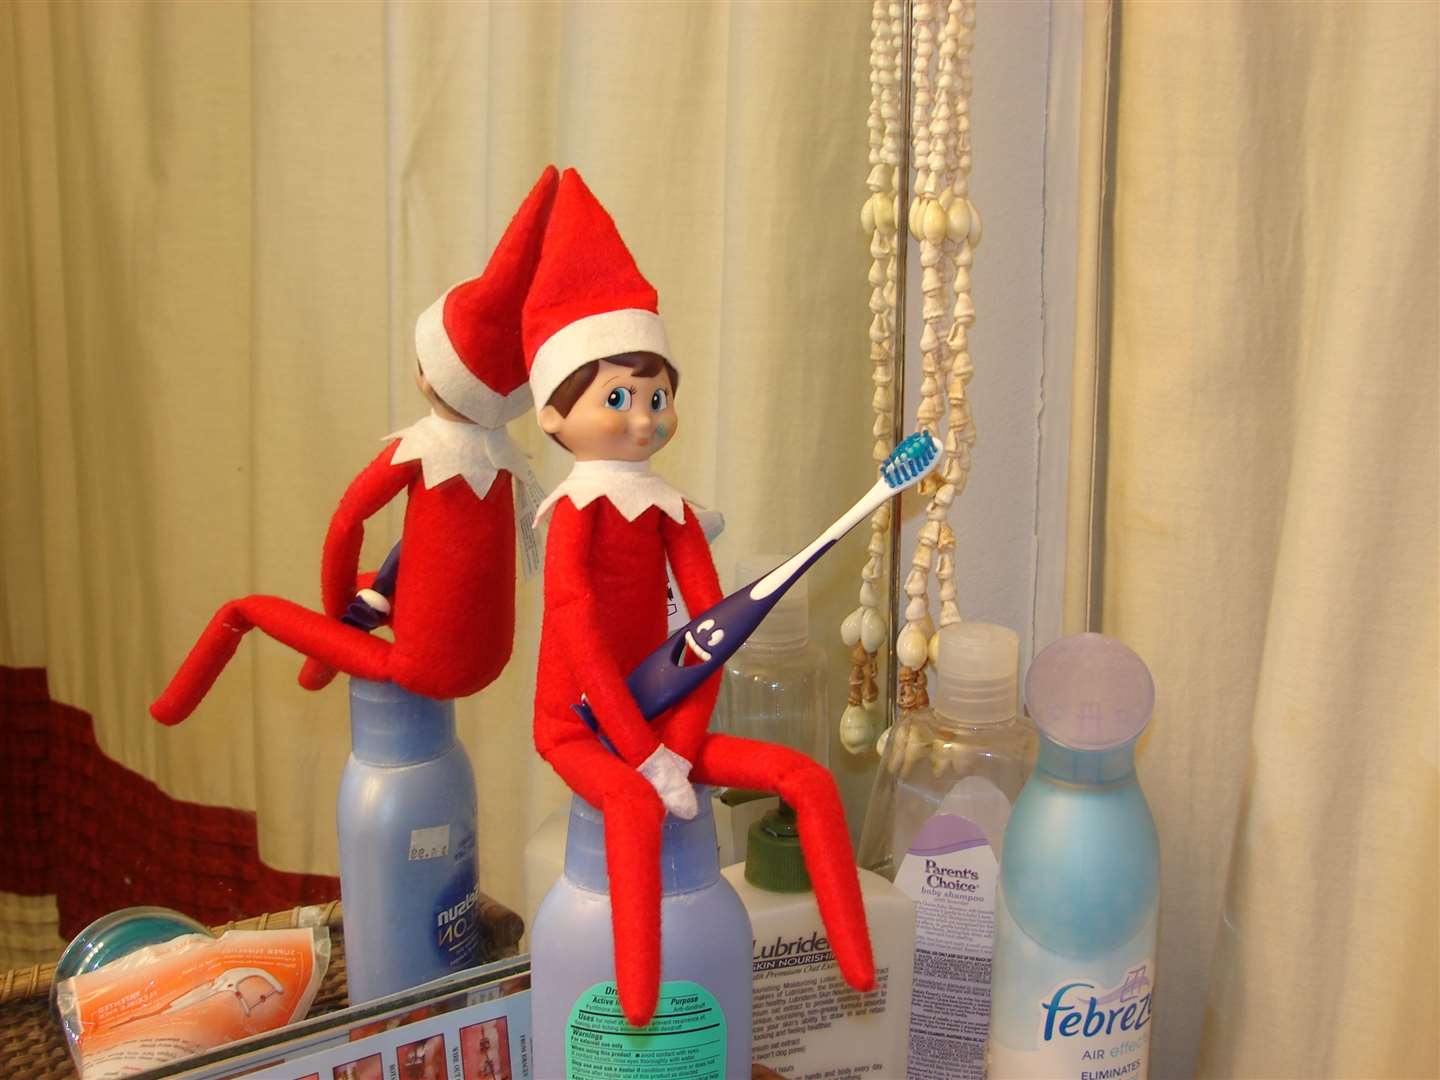 Has your home been visited by an Elf on the Shelf?